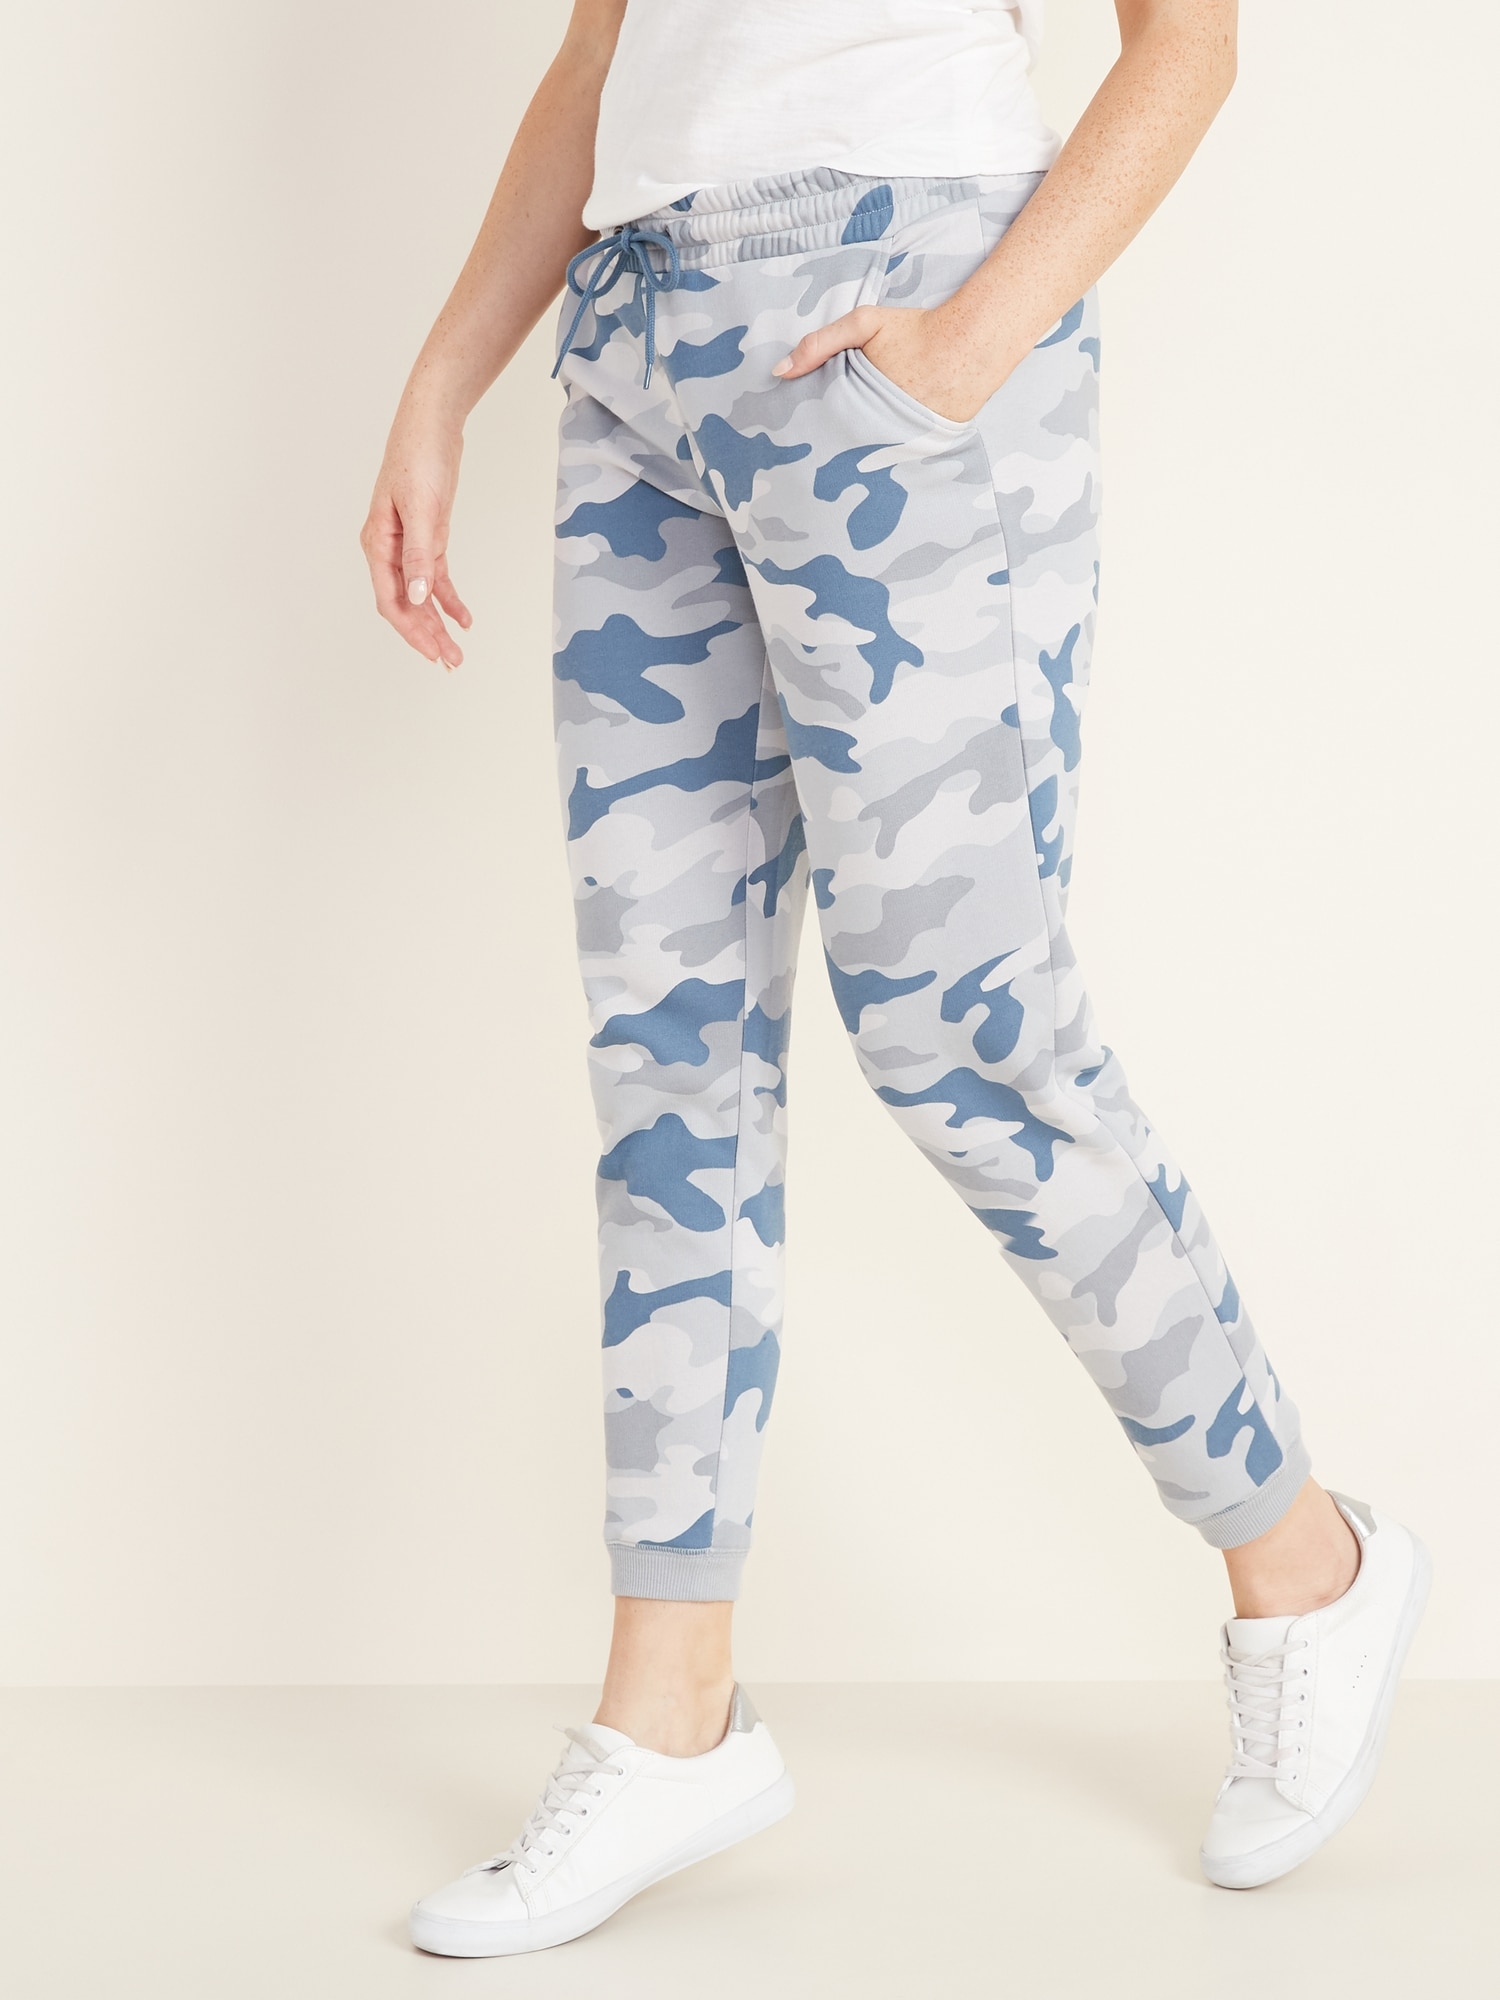 Women's Organic French Terry Jogger Pants in Jade